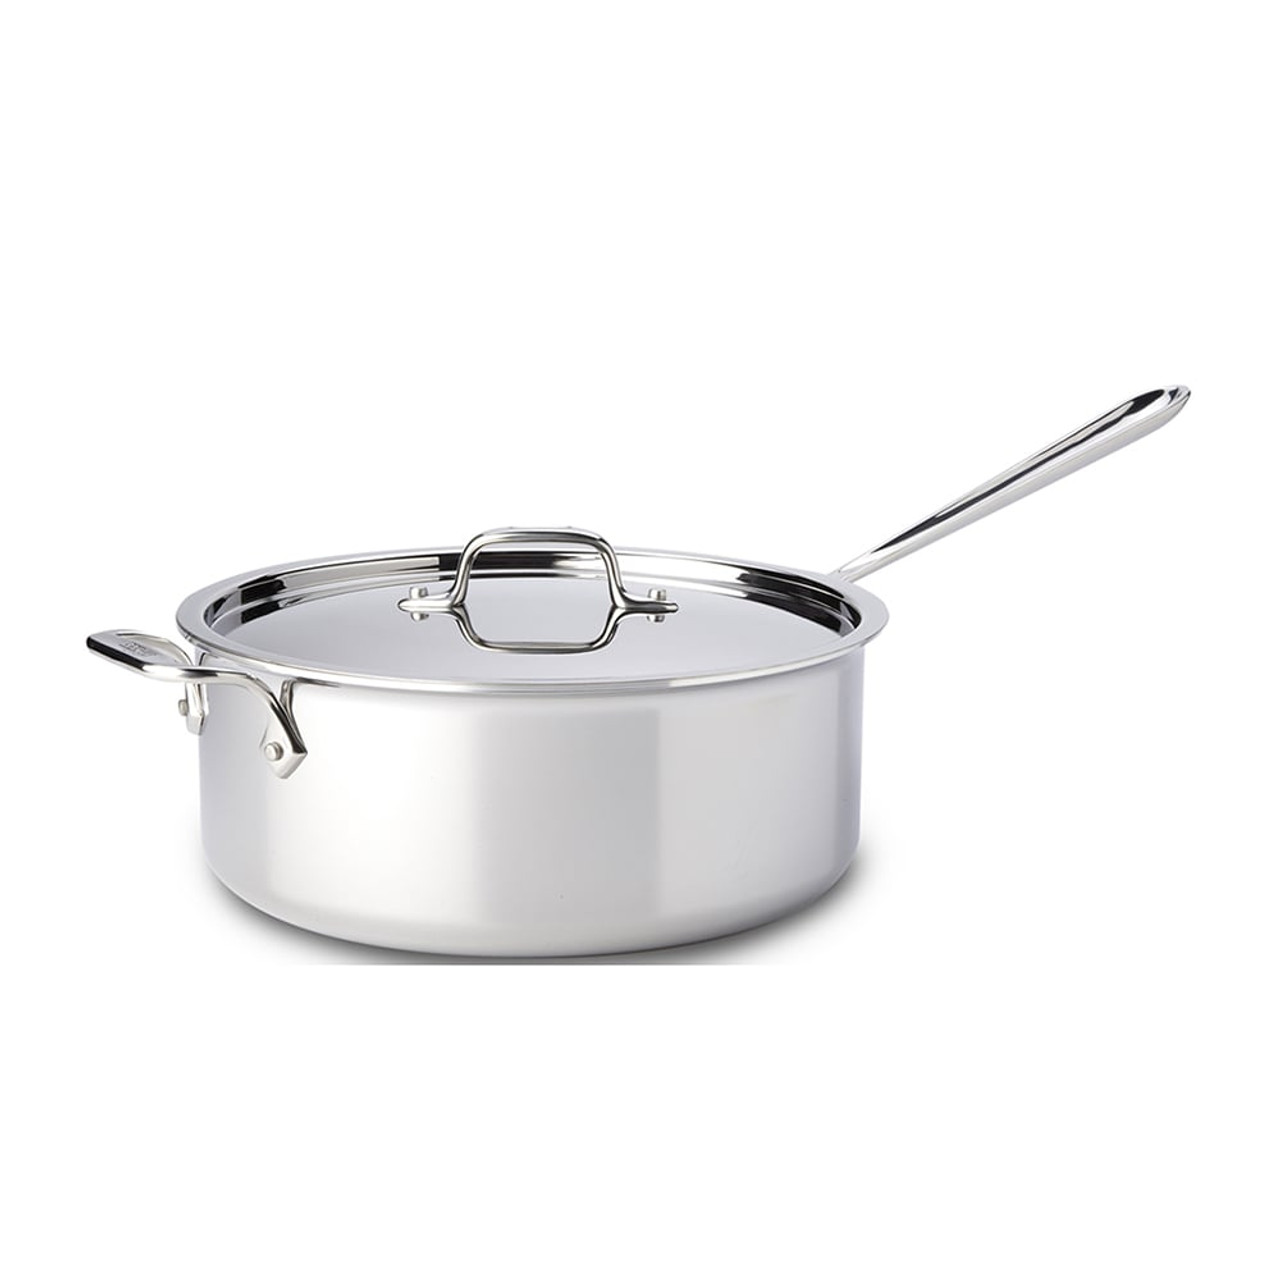 All-Clad D3 Stainless Steel Universal Pan